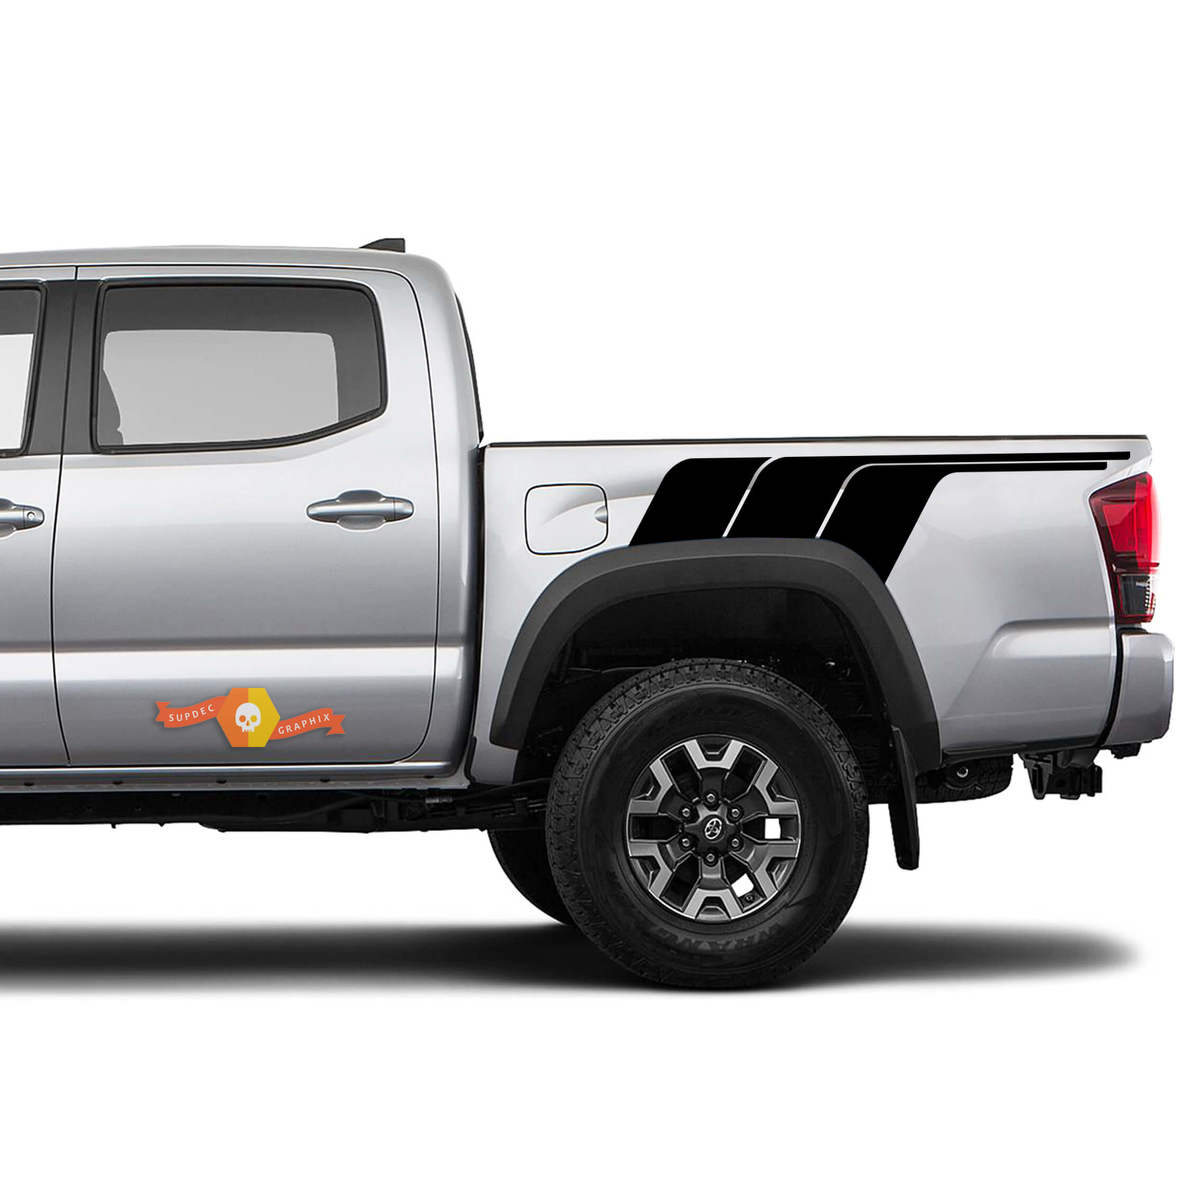 Toyota Trd old style Rear Side Tacoma vintage style One Color Graphics side decal stripe decal